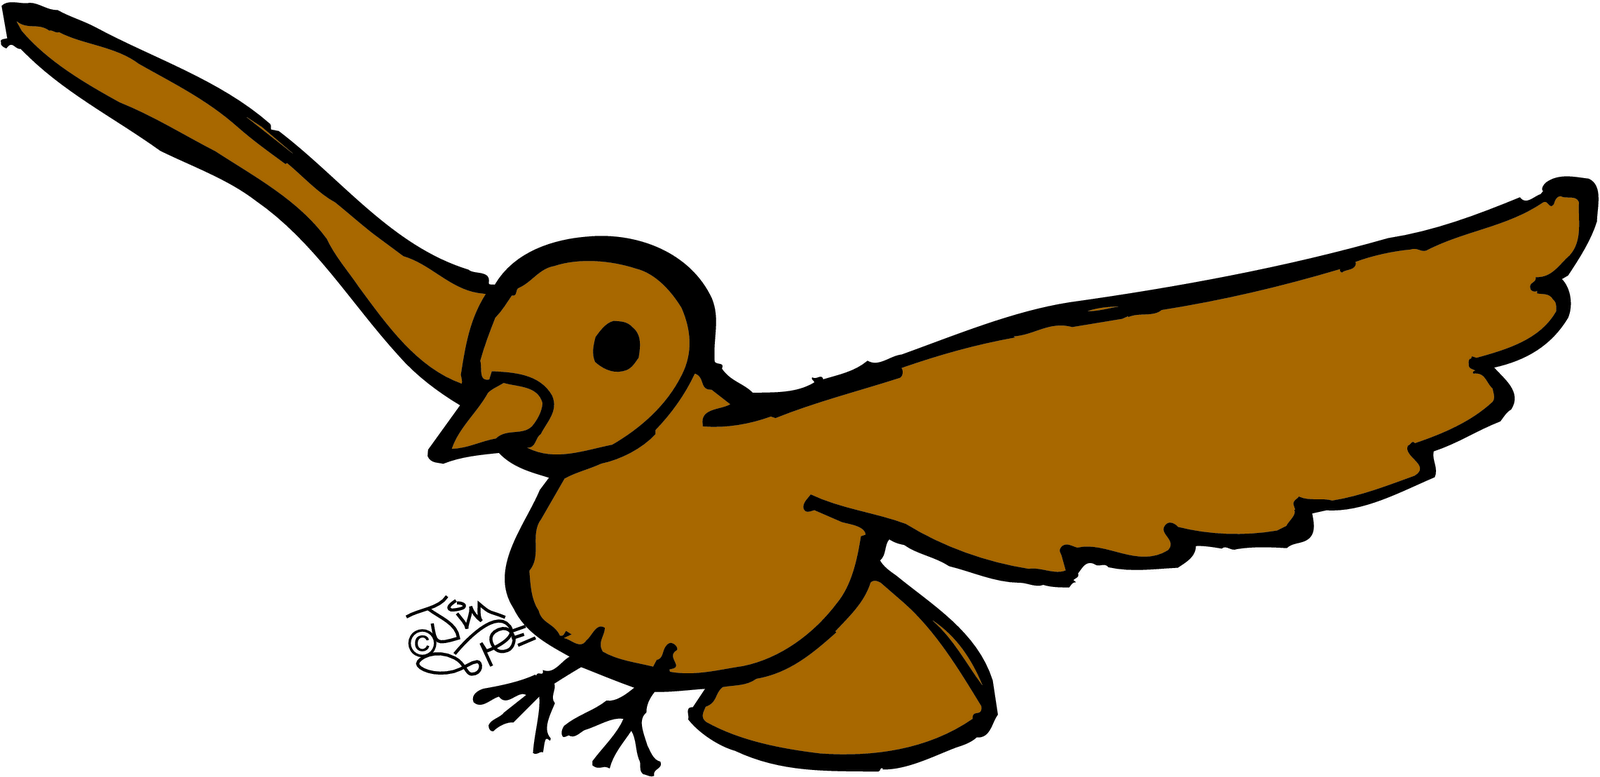 free clipart images birds - photo #26